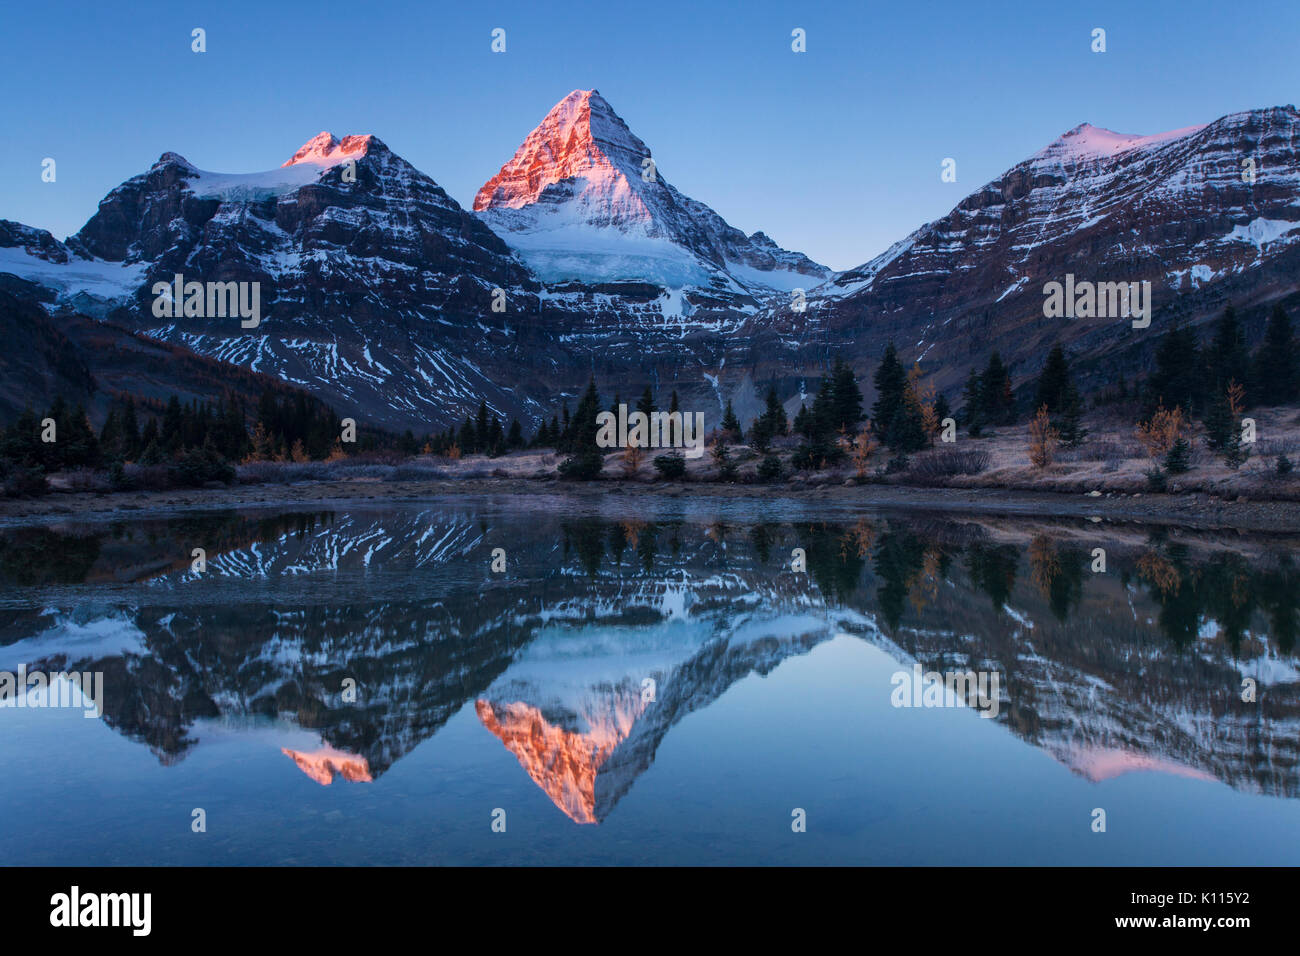 Mount Assiniboine reflected in Lage Magog at sunrise, Mount Assiniboine Provincial Park, Rocky Mountains, British Columbia, Canada. Stock Photo